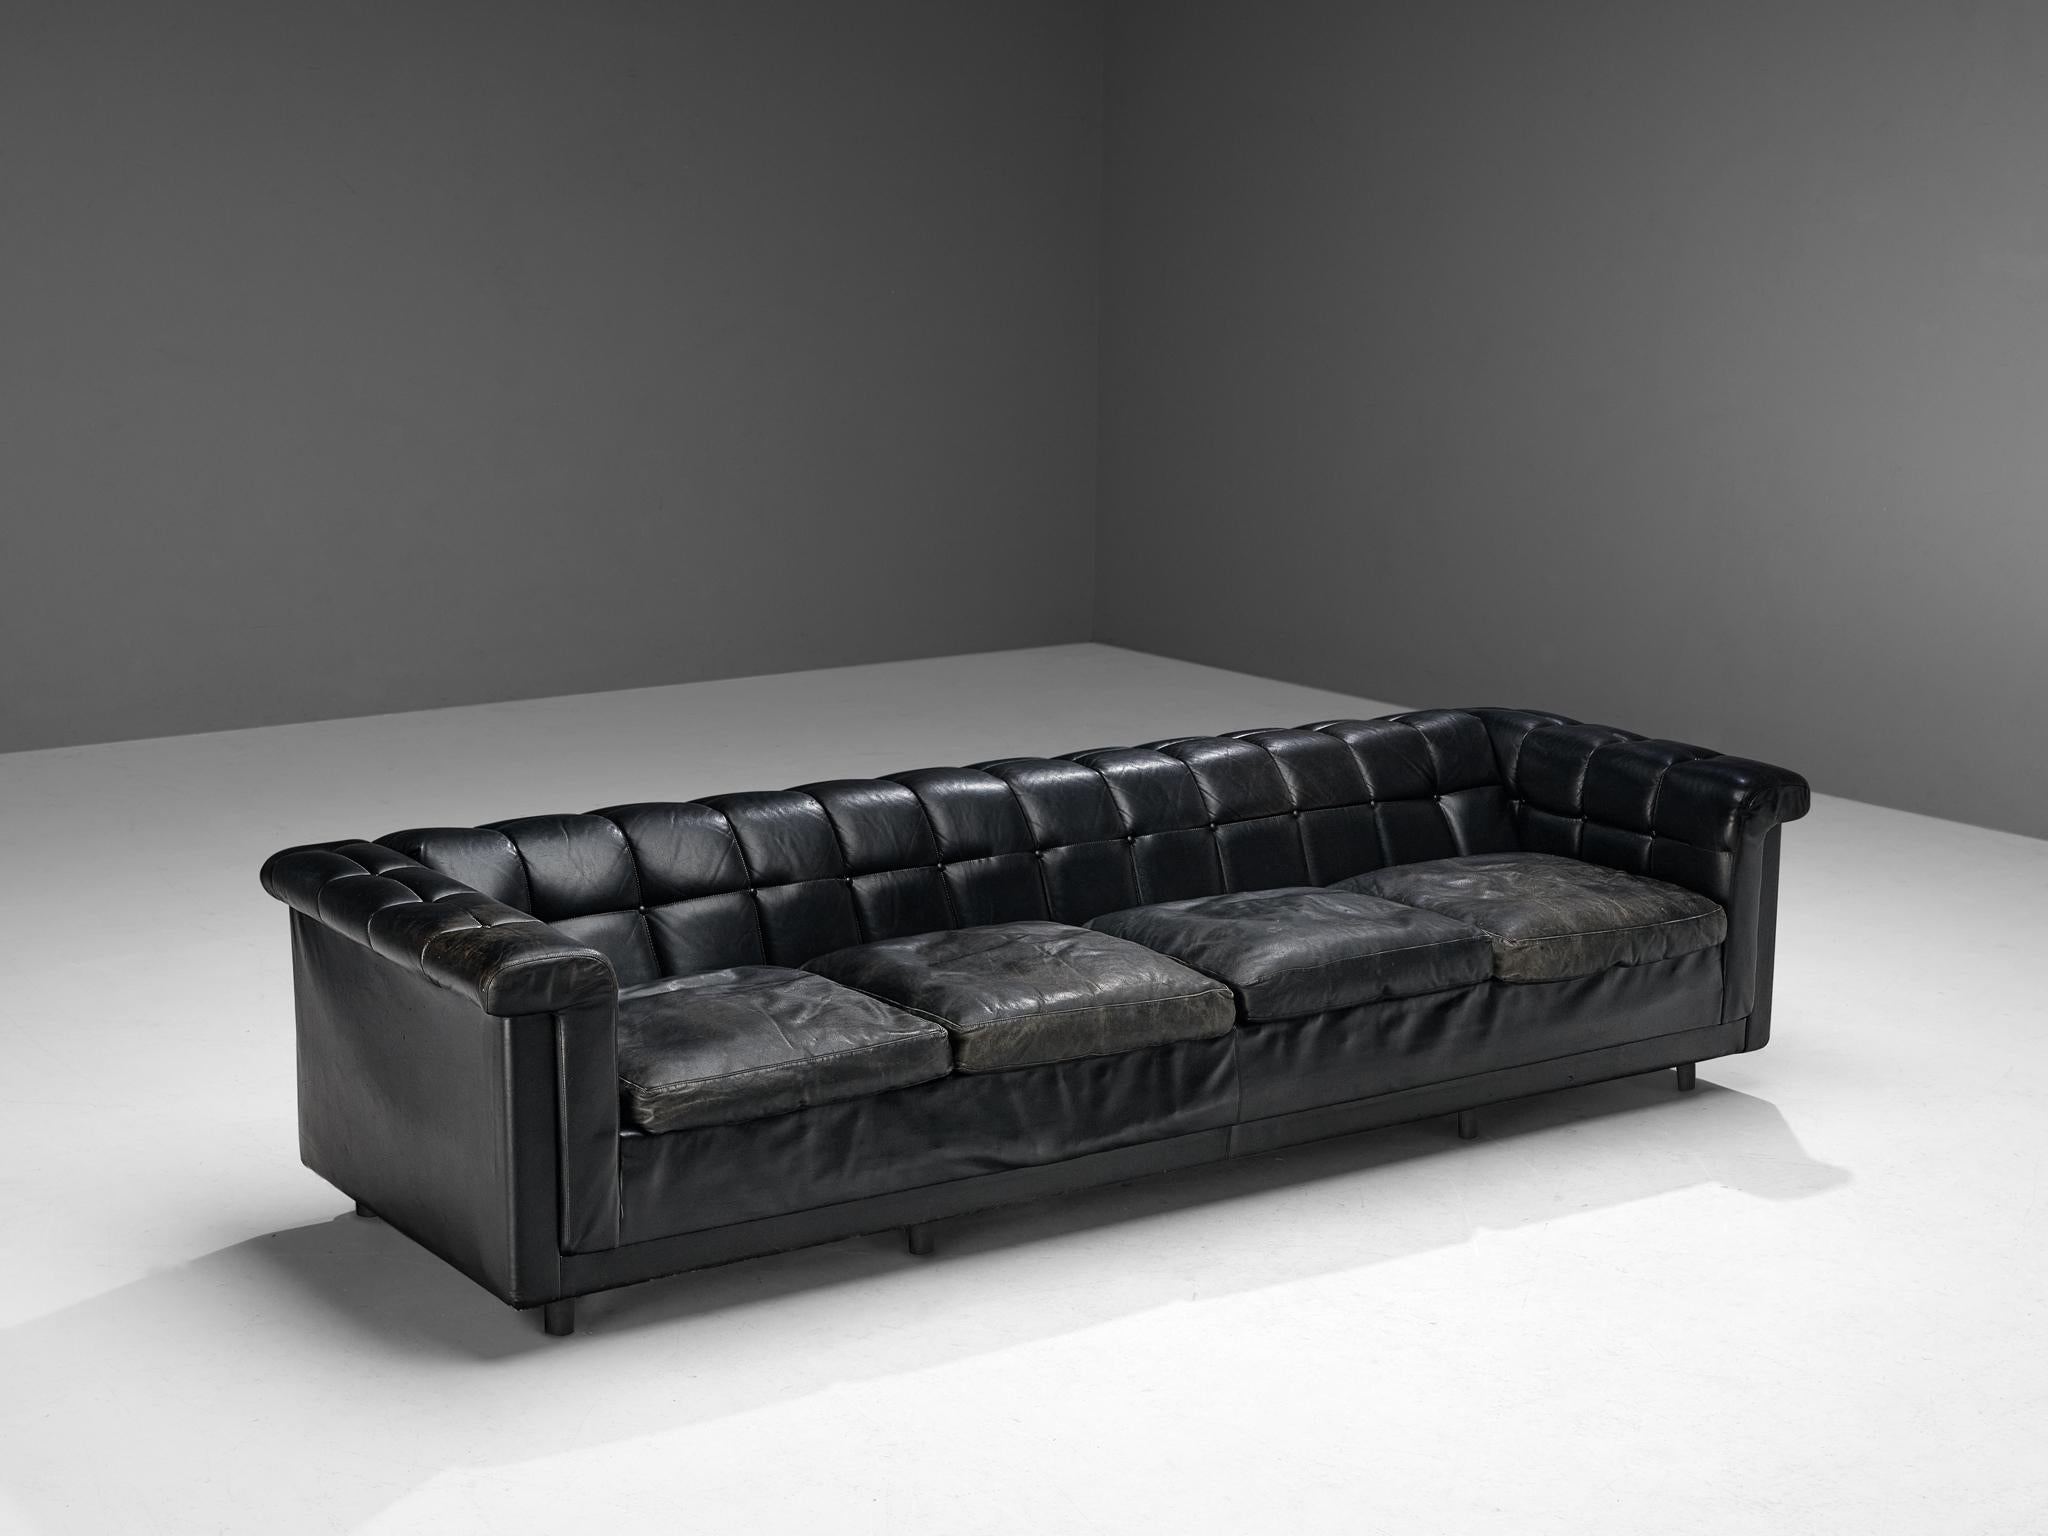 Sofa, leather, wood, Nothern Europe, 1980s

This sofa has an interesting appearance of a classic chesterfield chair with a modern aesthetic. The outside is tight and sleek. The thick padded backrest and armrests feature a geometric surface with